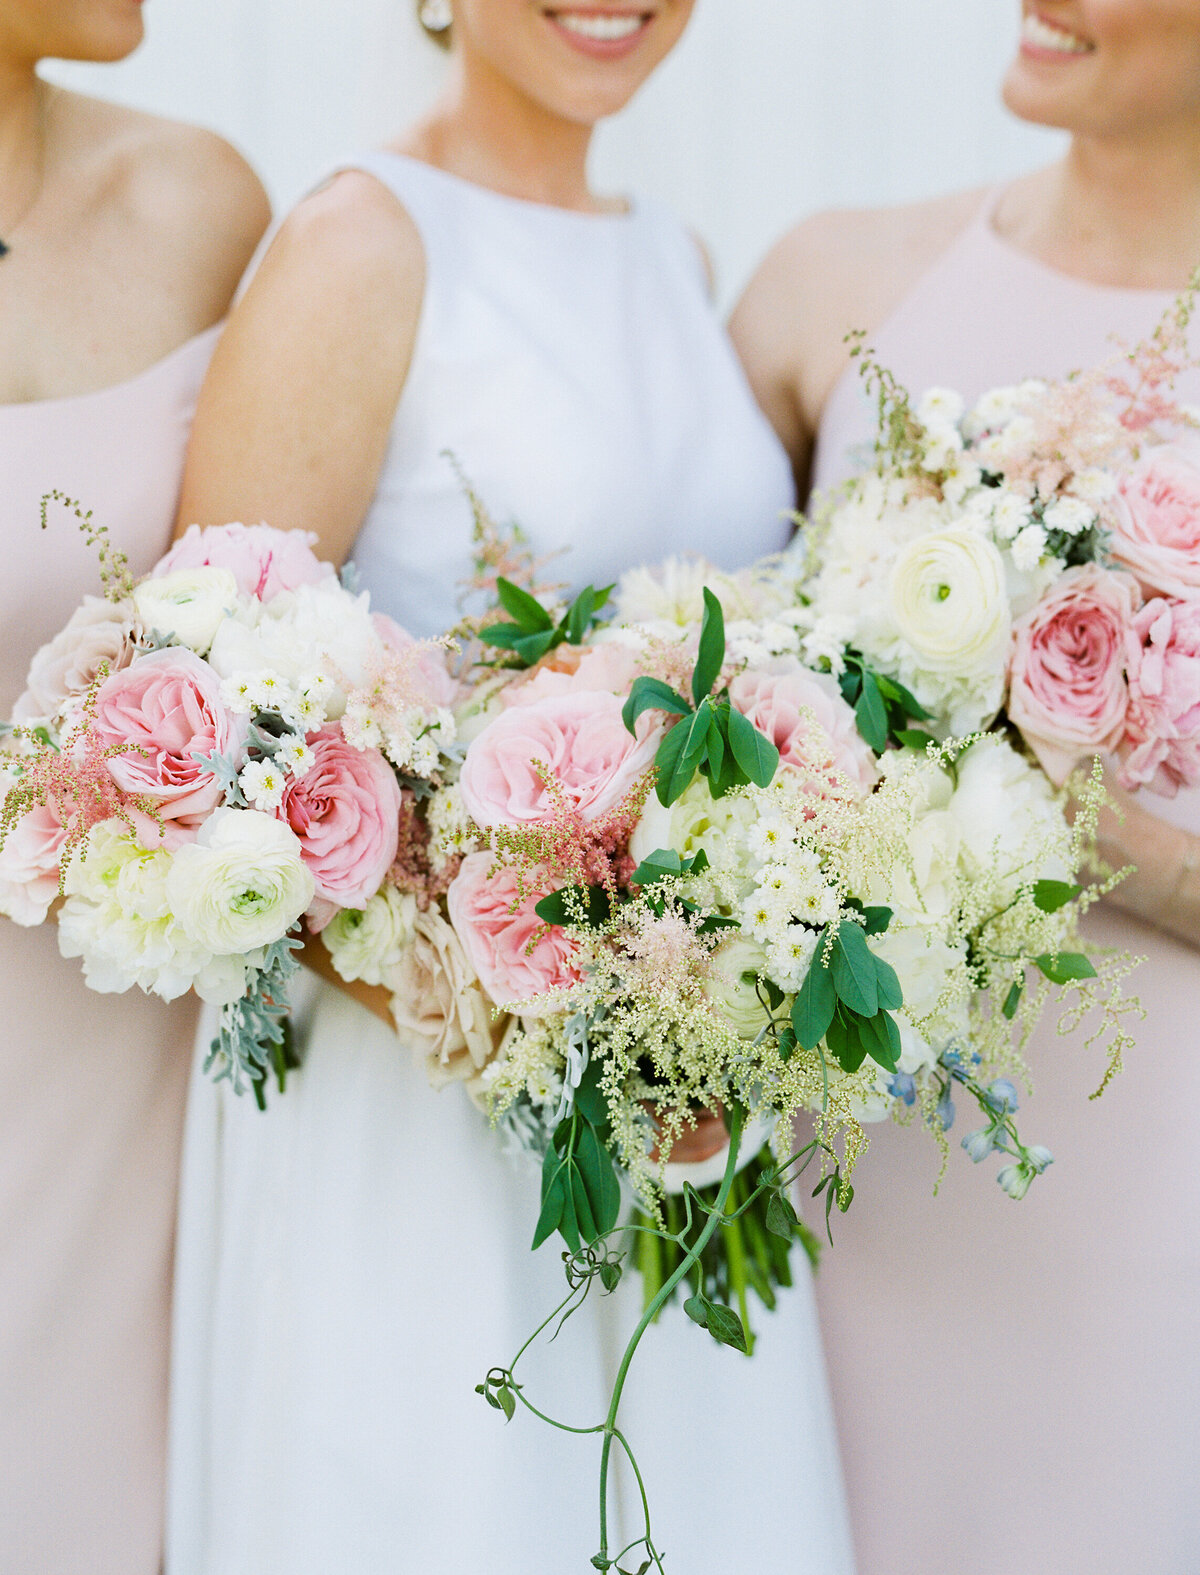 Bride and bridesmaids holding white, pink and green bouquets